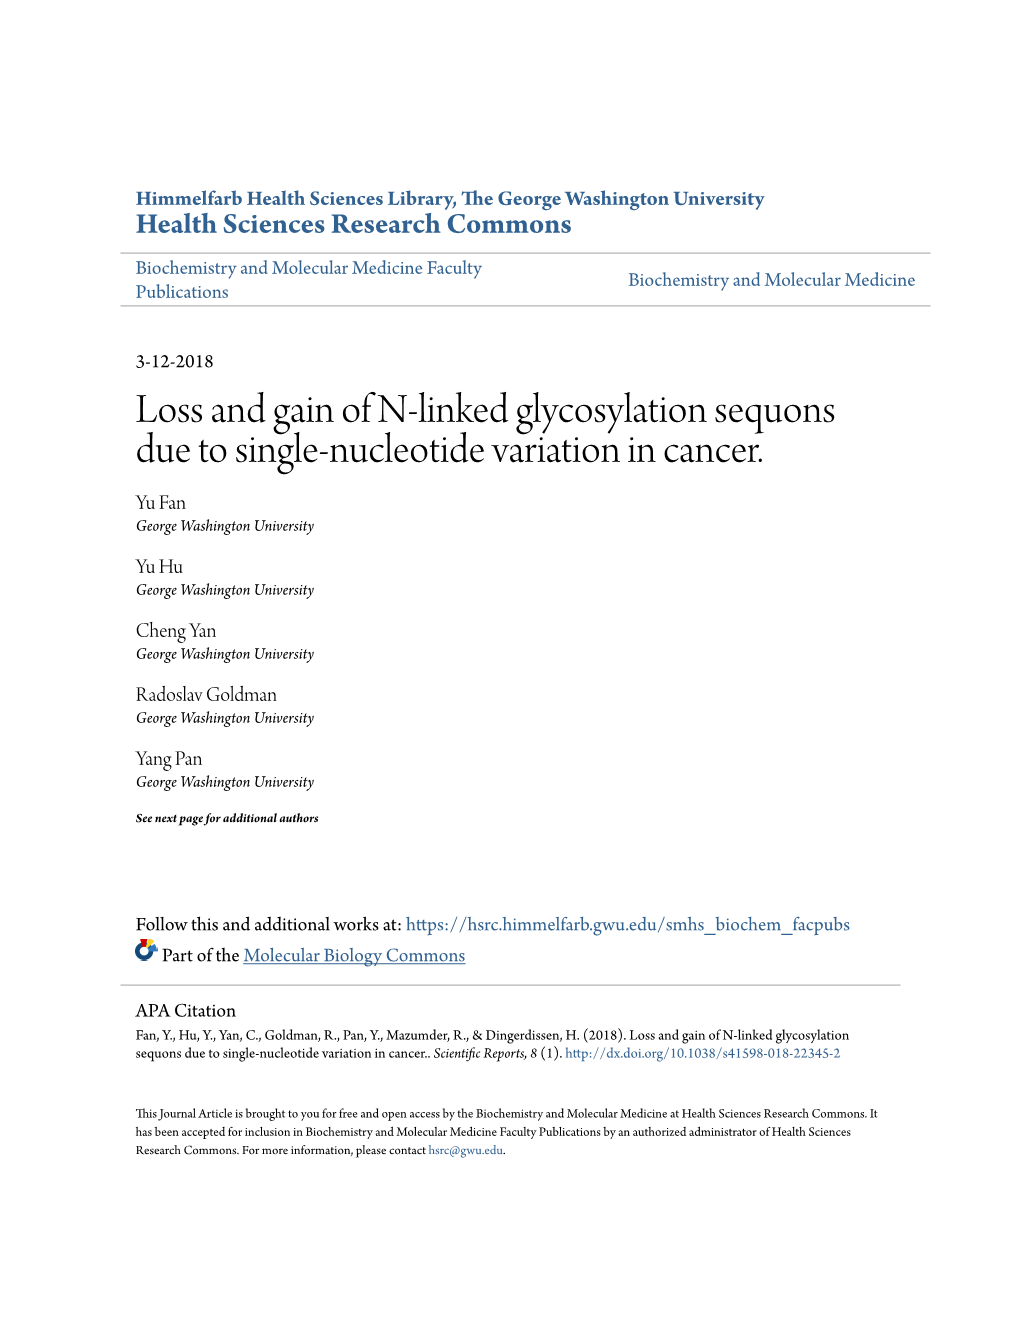 Loss and Gain of N-Linked Glycosylation Sequons Due to Single-Nucleotide Variation in Cancer